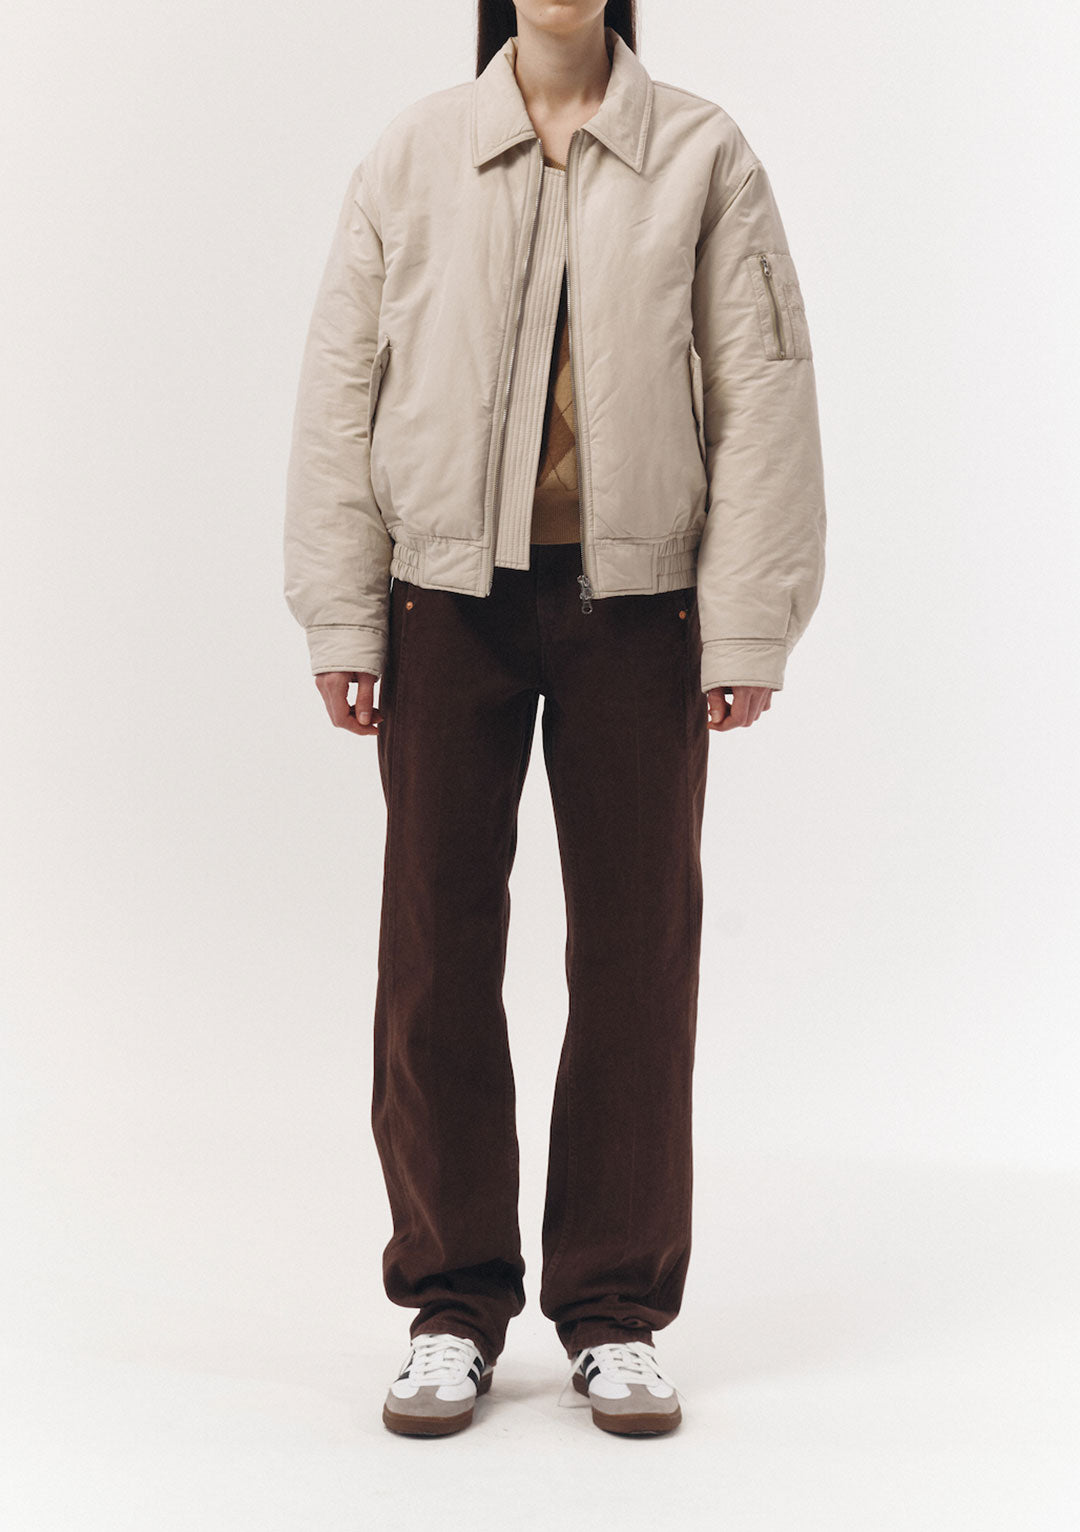 DUNST Classic Collared Bomber Jacket